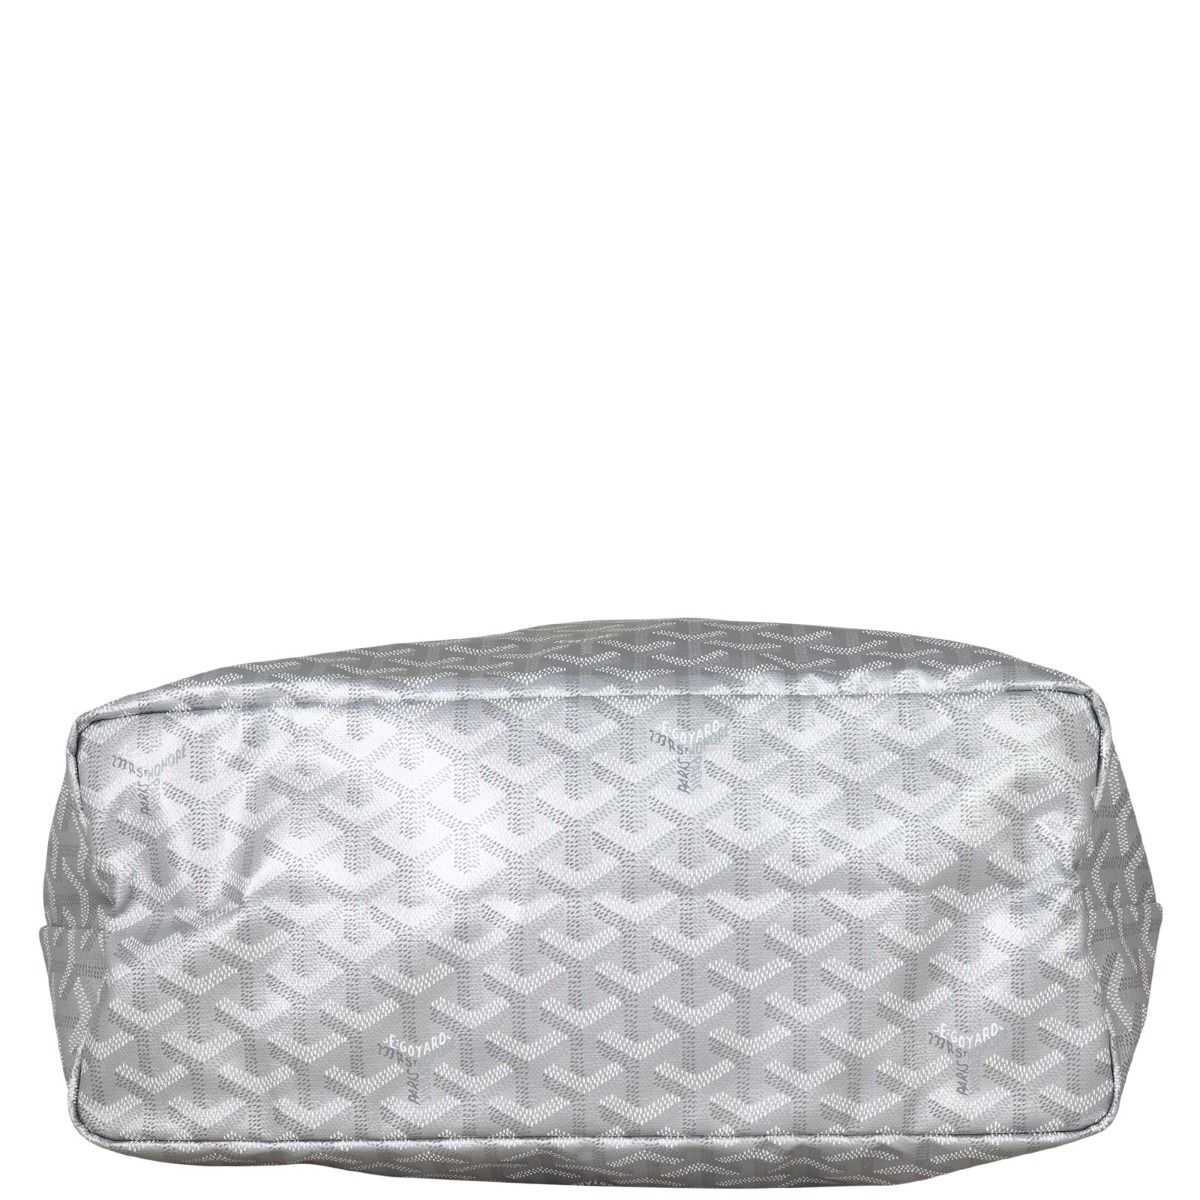 Coming New Goyard St. Louis PM Metallic Limited Edition 2021 in silver,  gold & bronze with rec Paris May 2021 : 36.650.000 jt